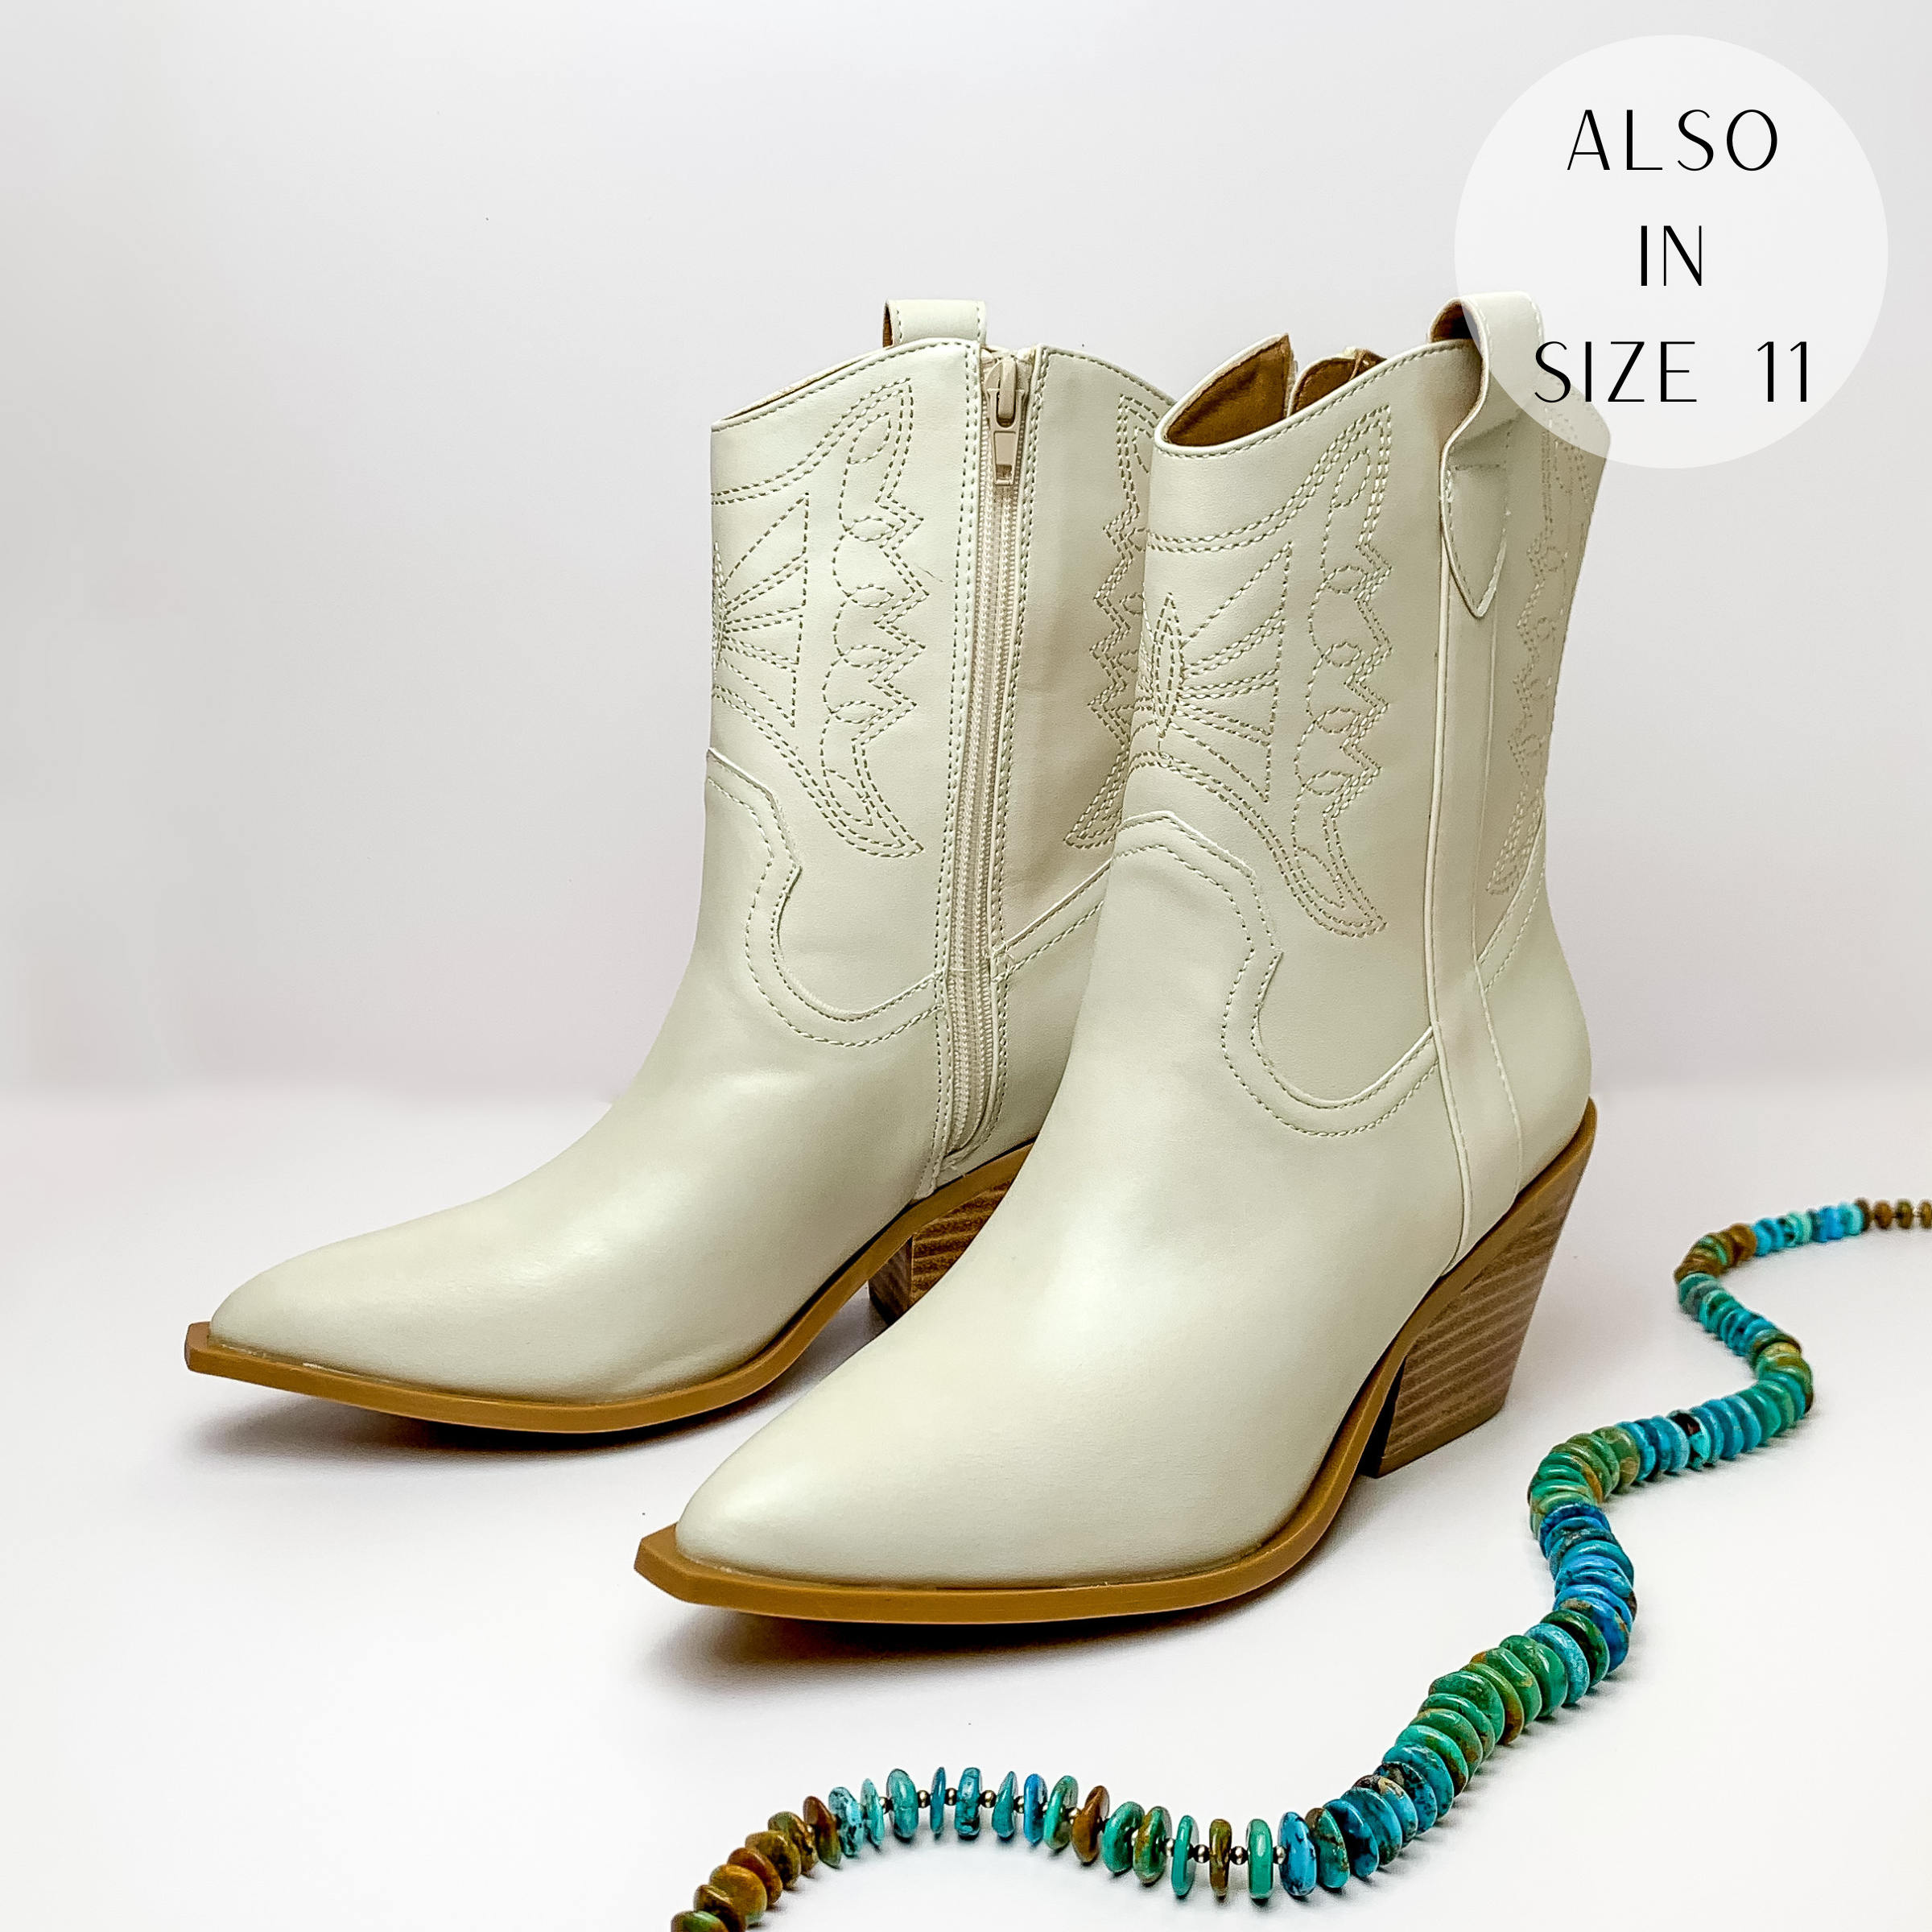 Bone white cowboy ankle boots with an ivory western stitching and tan heel. These boots are pictured on a white background with turquoise beads on the right side of the boots.